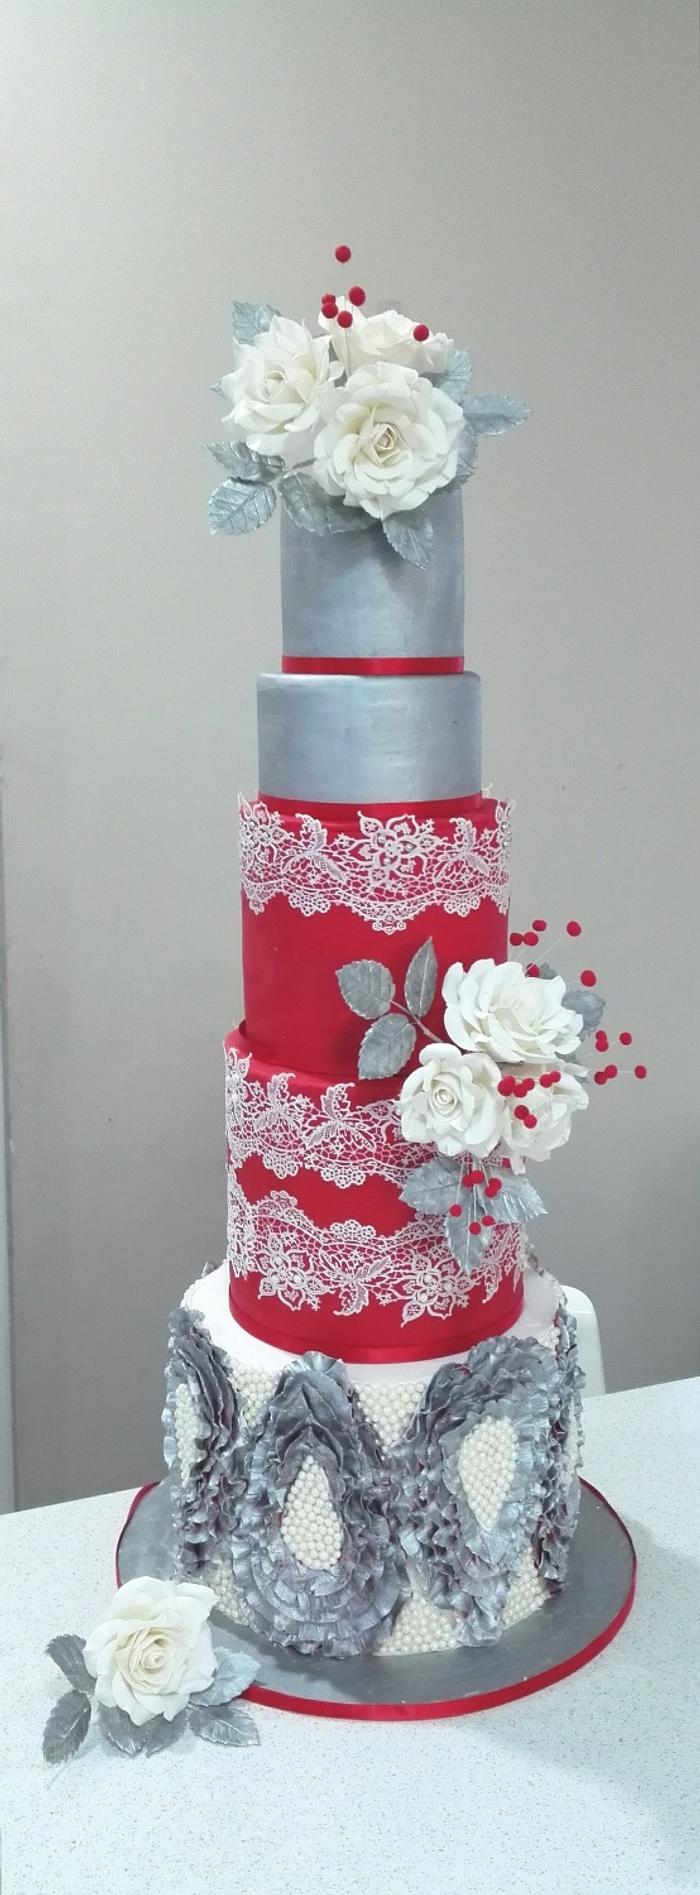 Wedding cake in red, silver and pearls